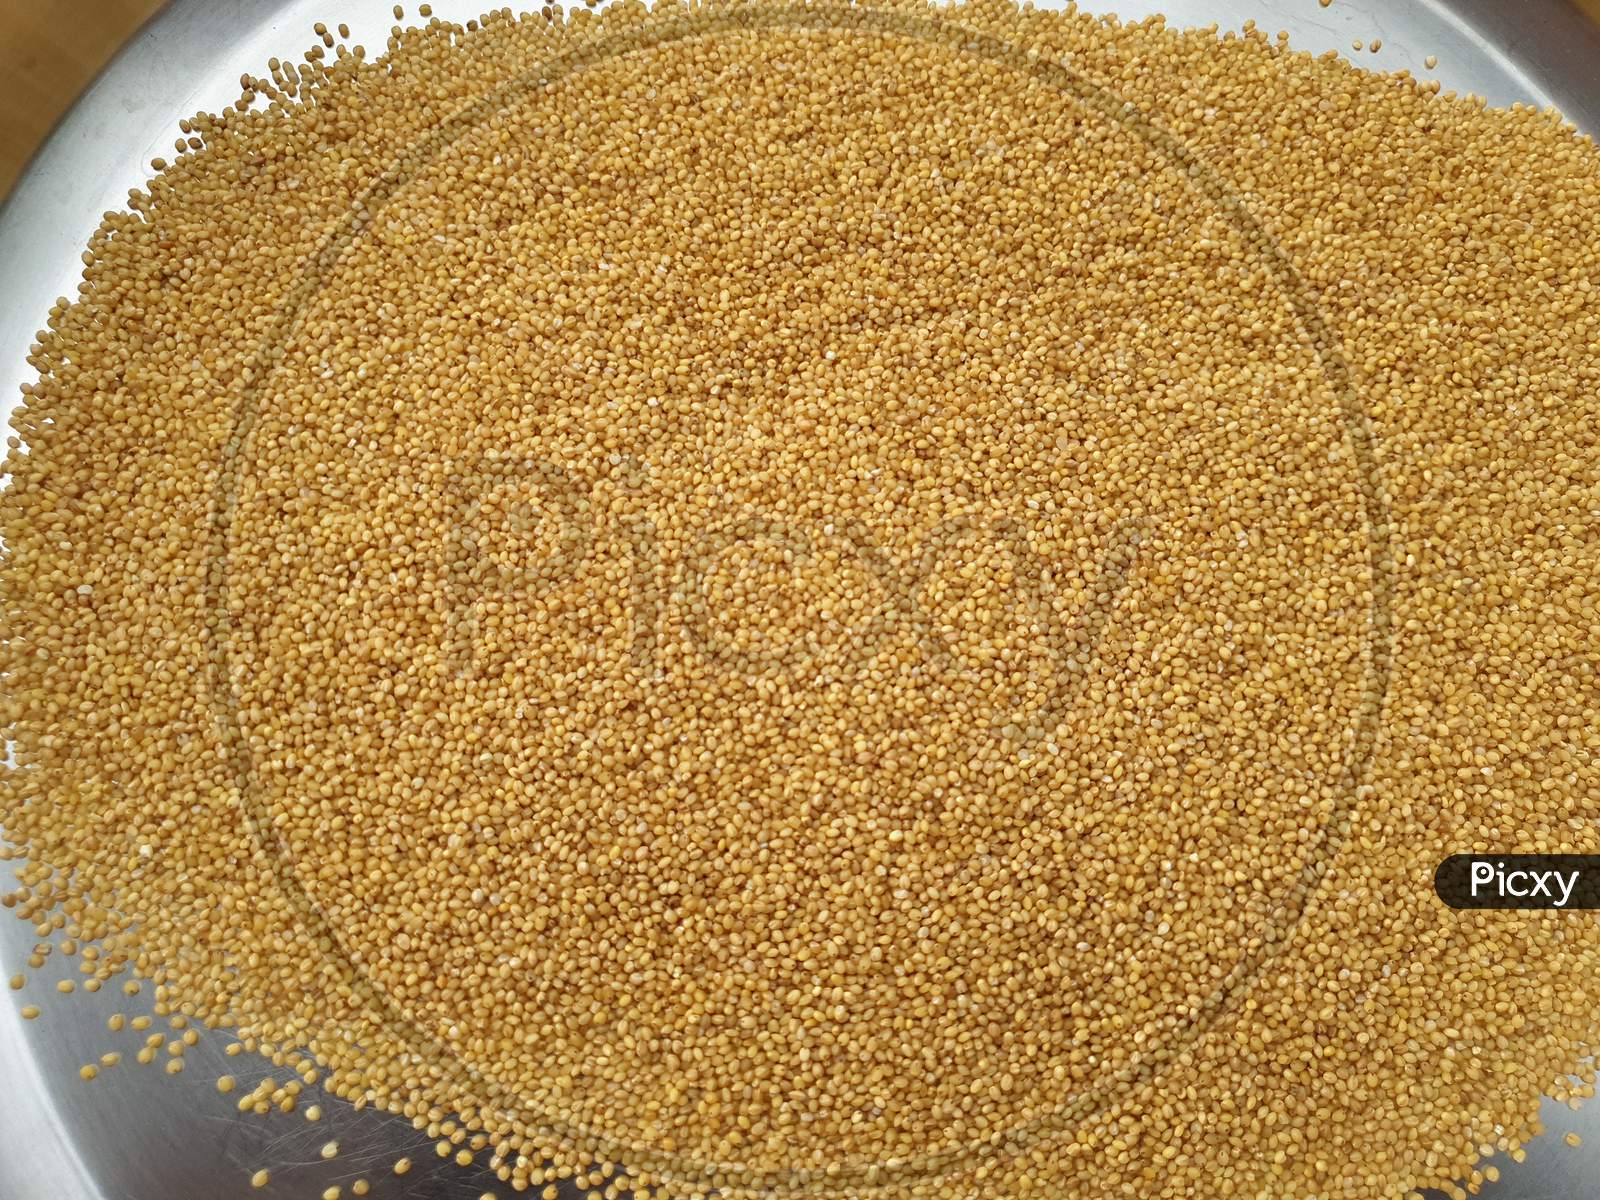 These are the foxtail millet